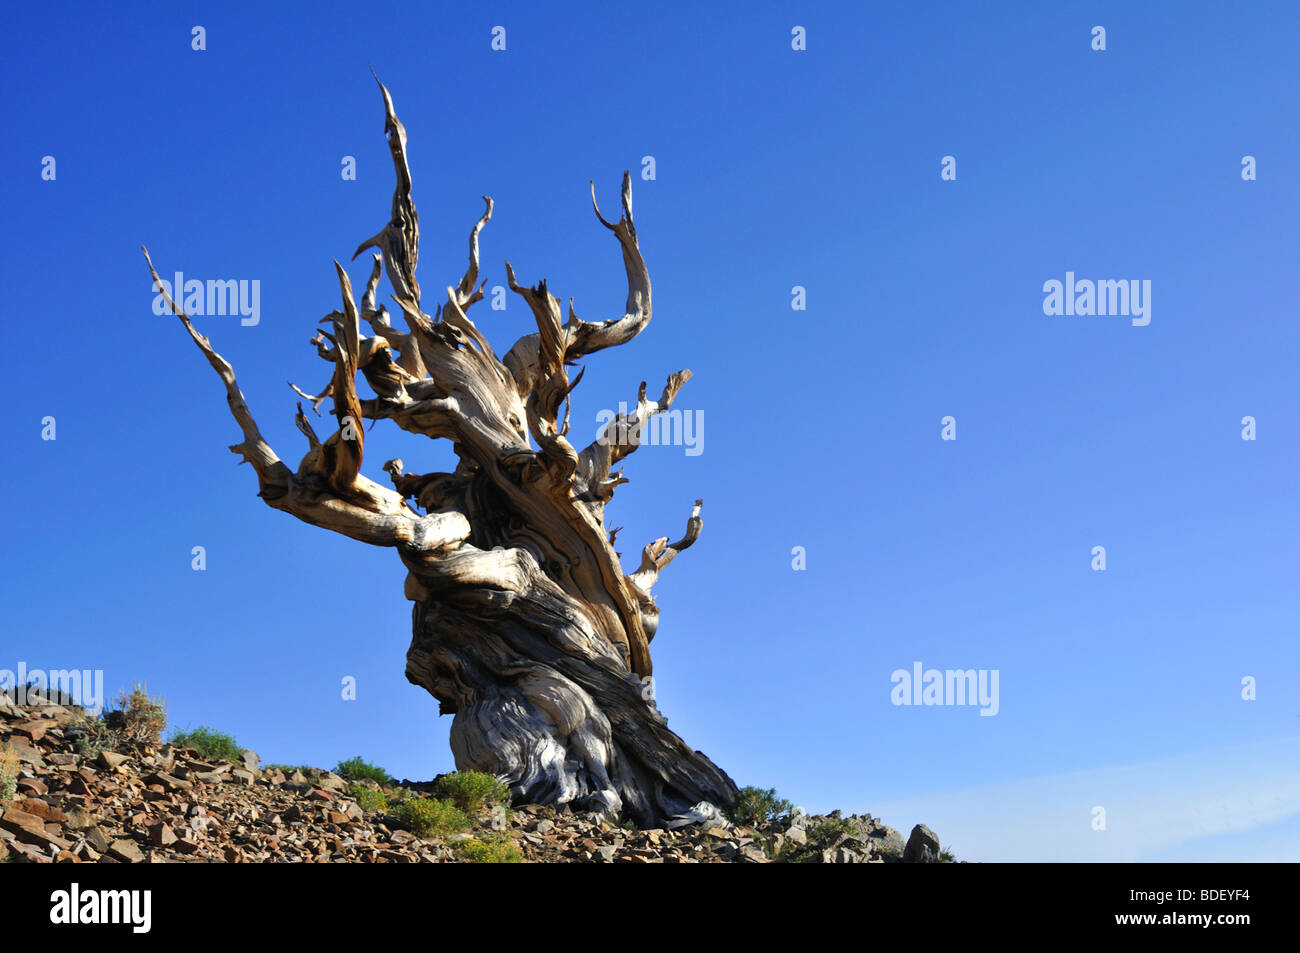 Bristlecone Pine tree from the Bristlecone Pine Forest in the Inyo National Forest, White Mountains, California Stock Photo